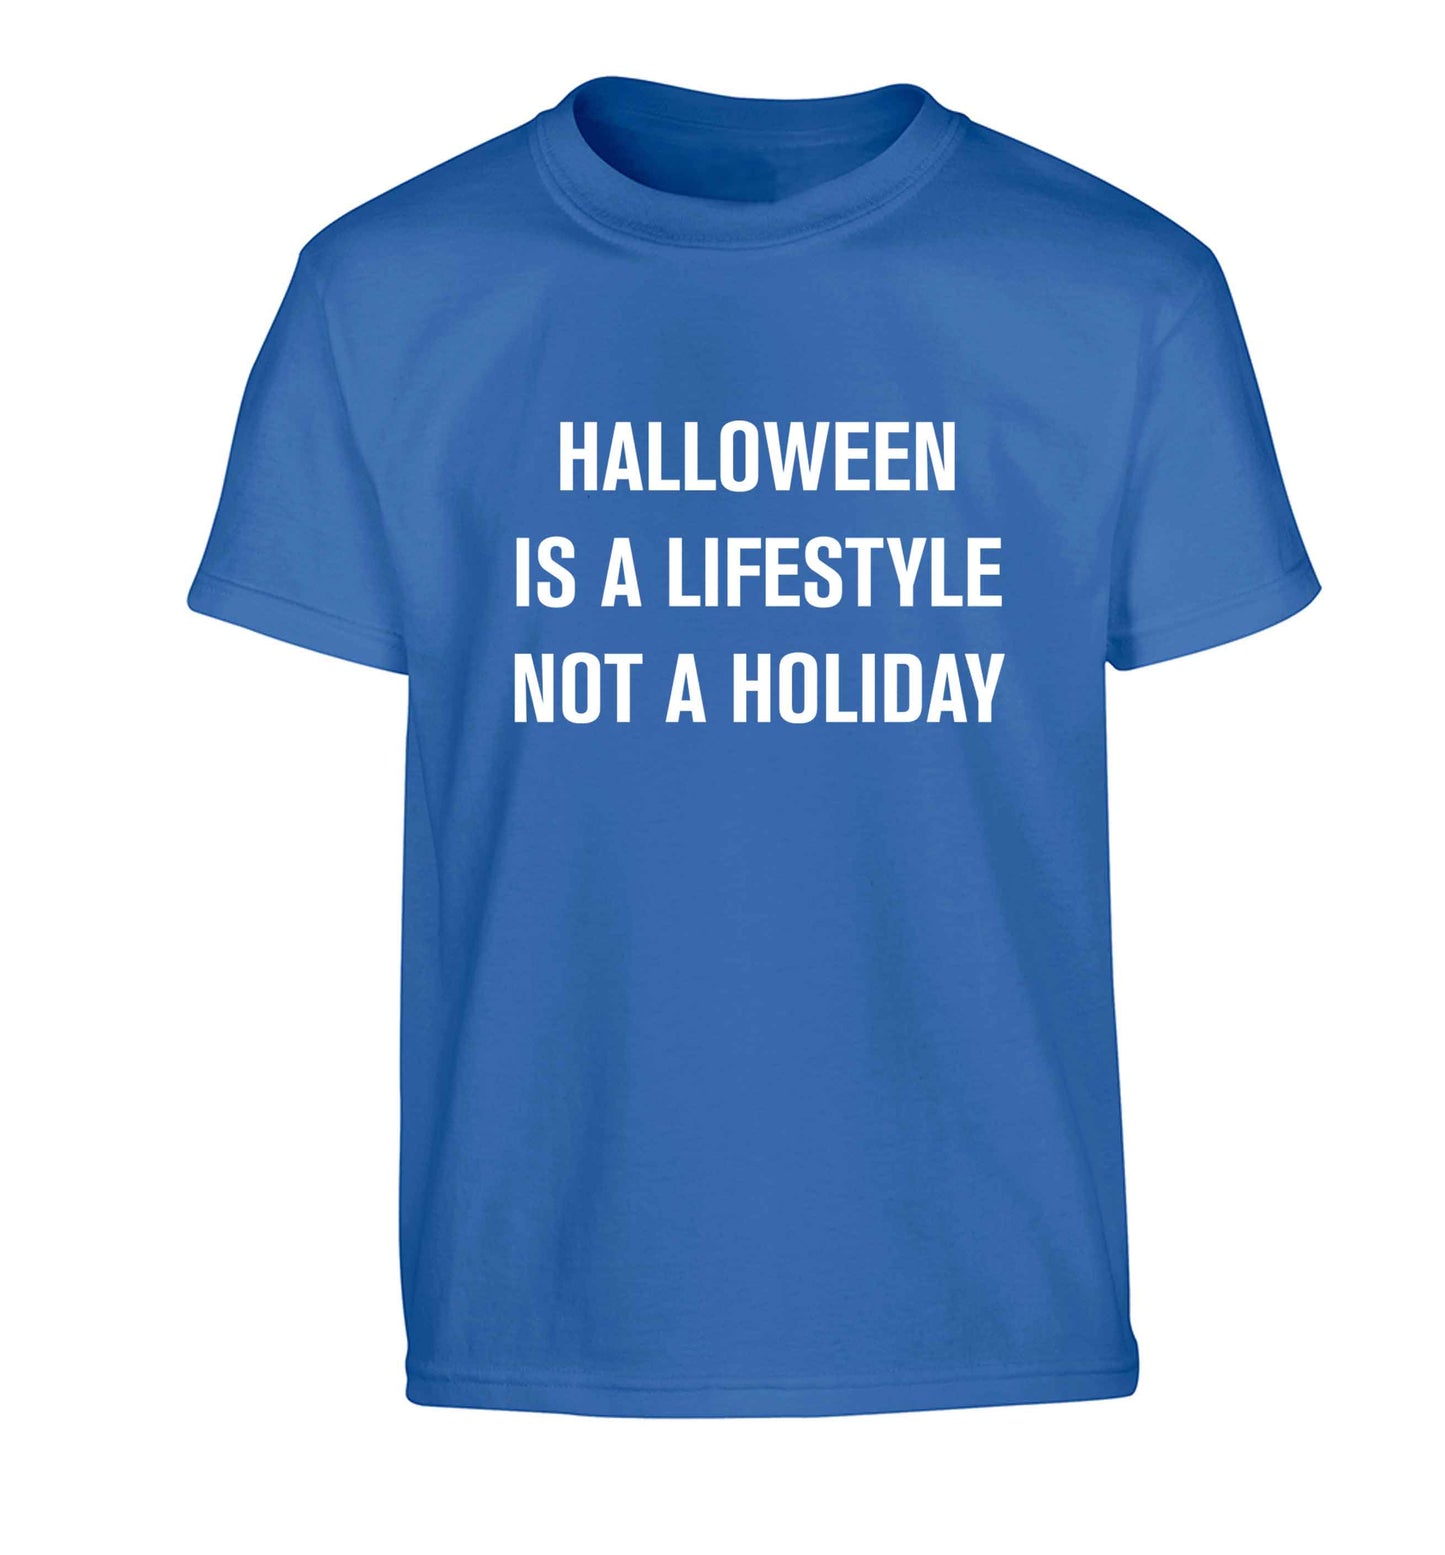 Halloween is a lifestyle not a holiday Children's blue Tshirt 12-13 Years